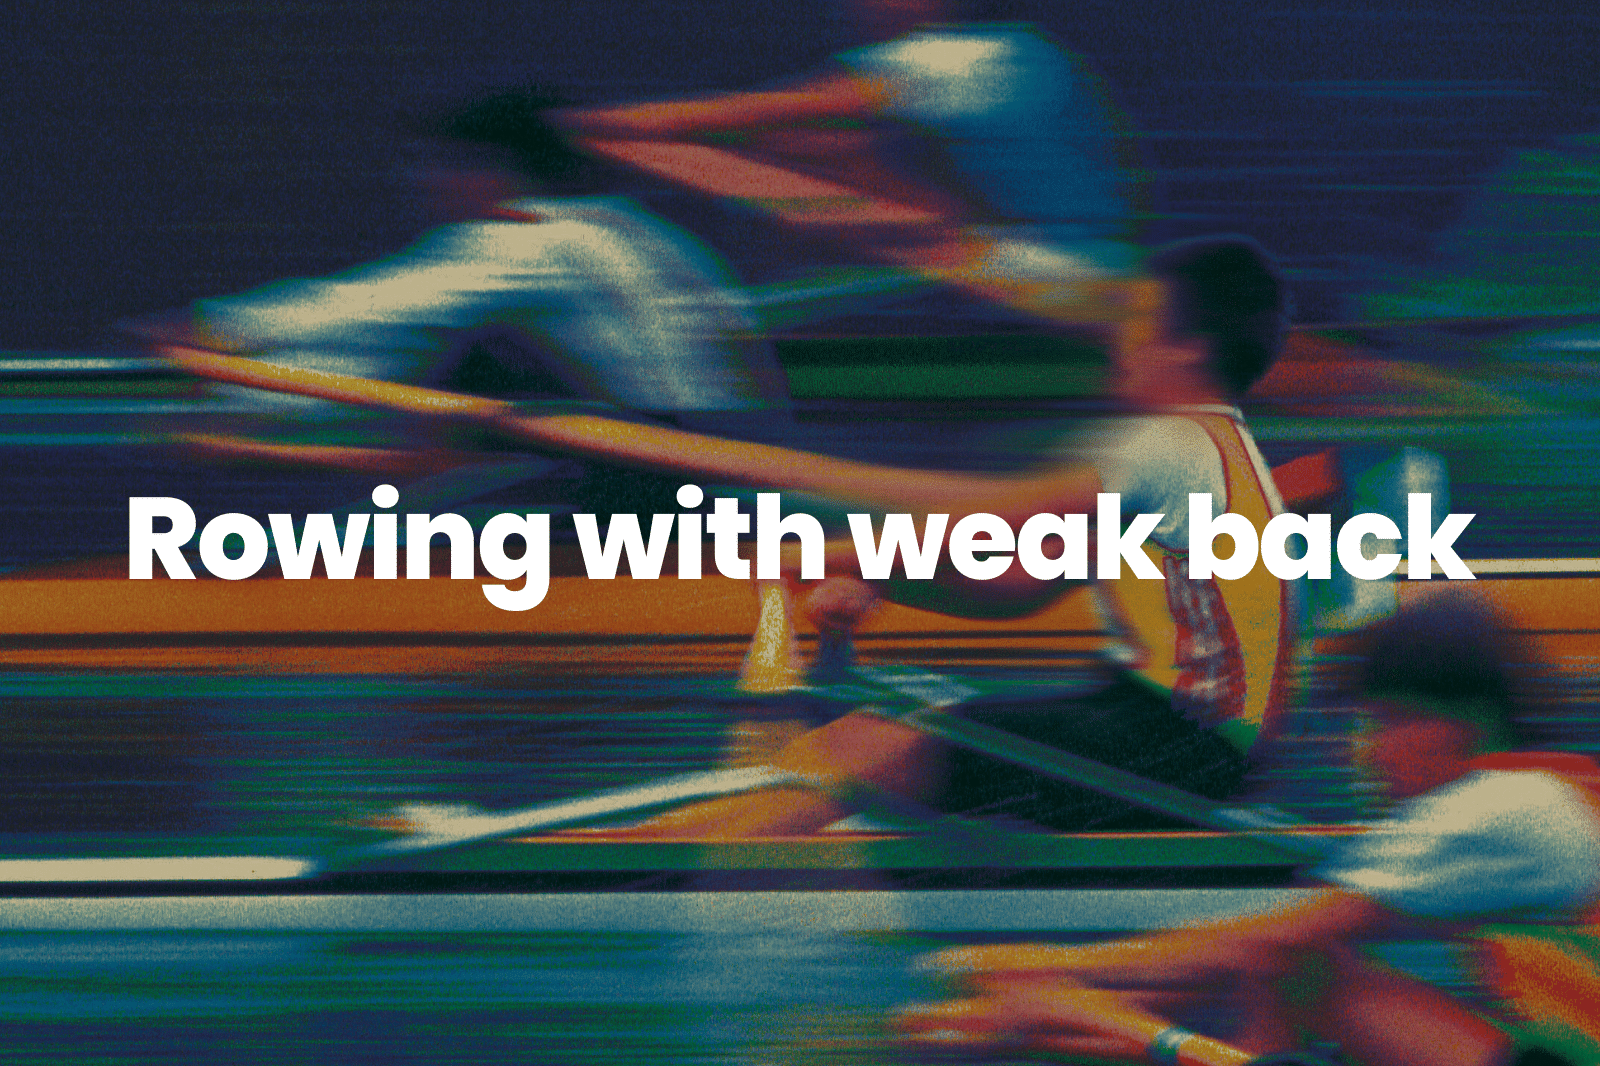 Rowing with weak back